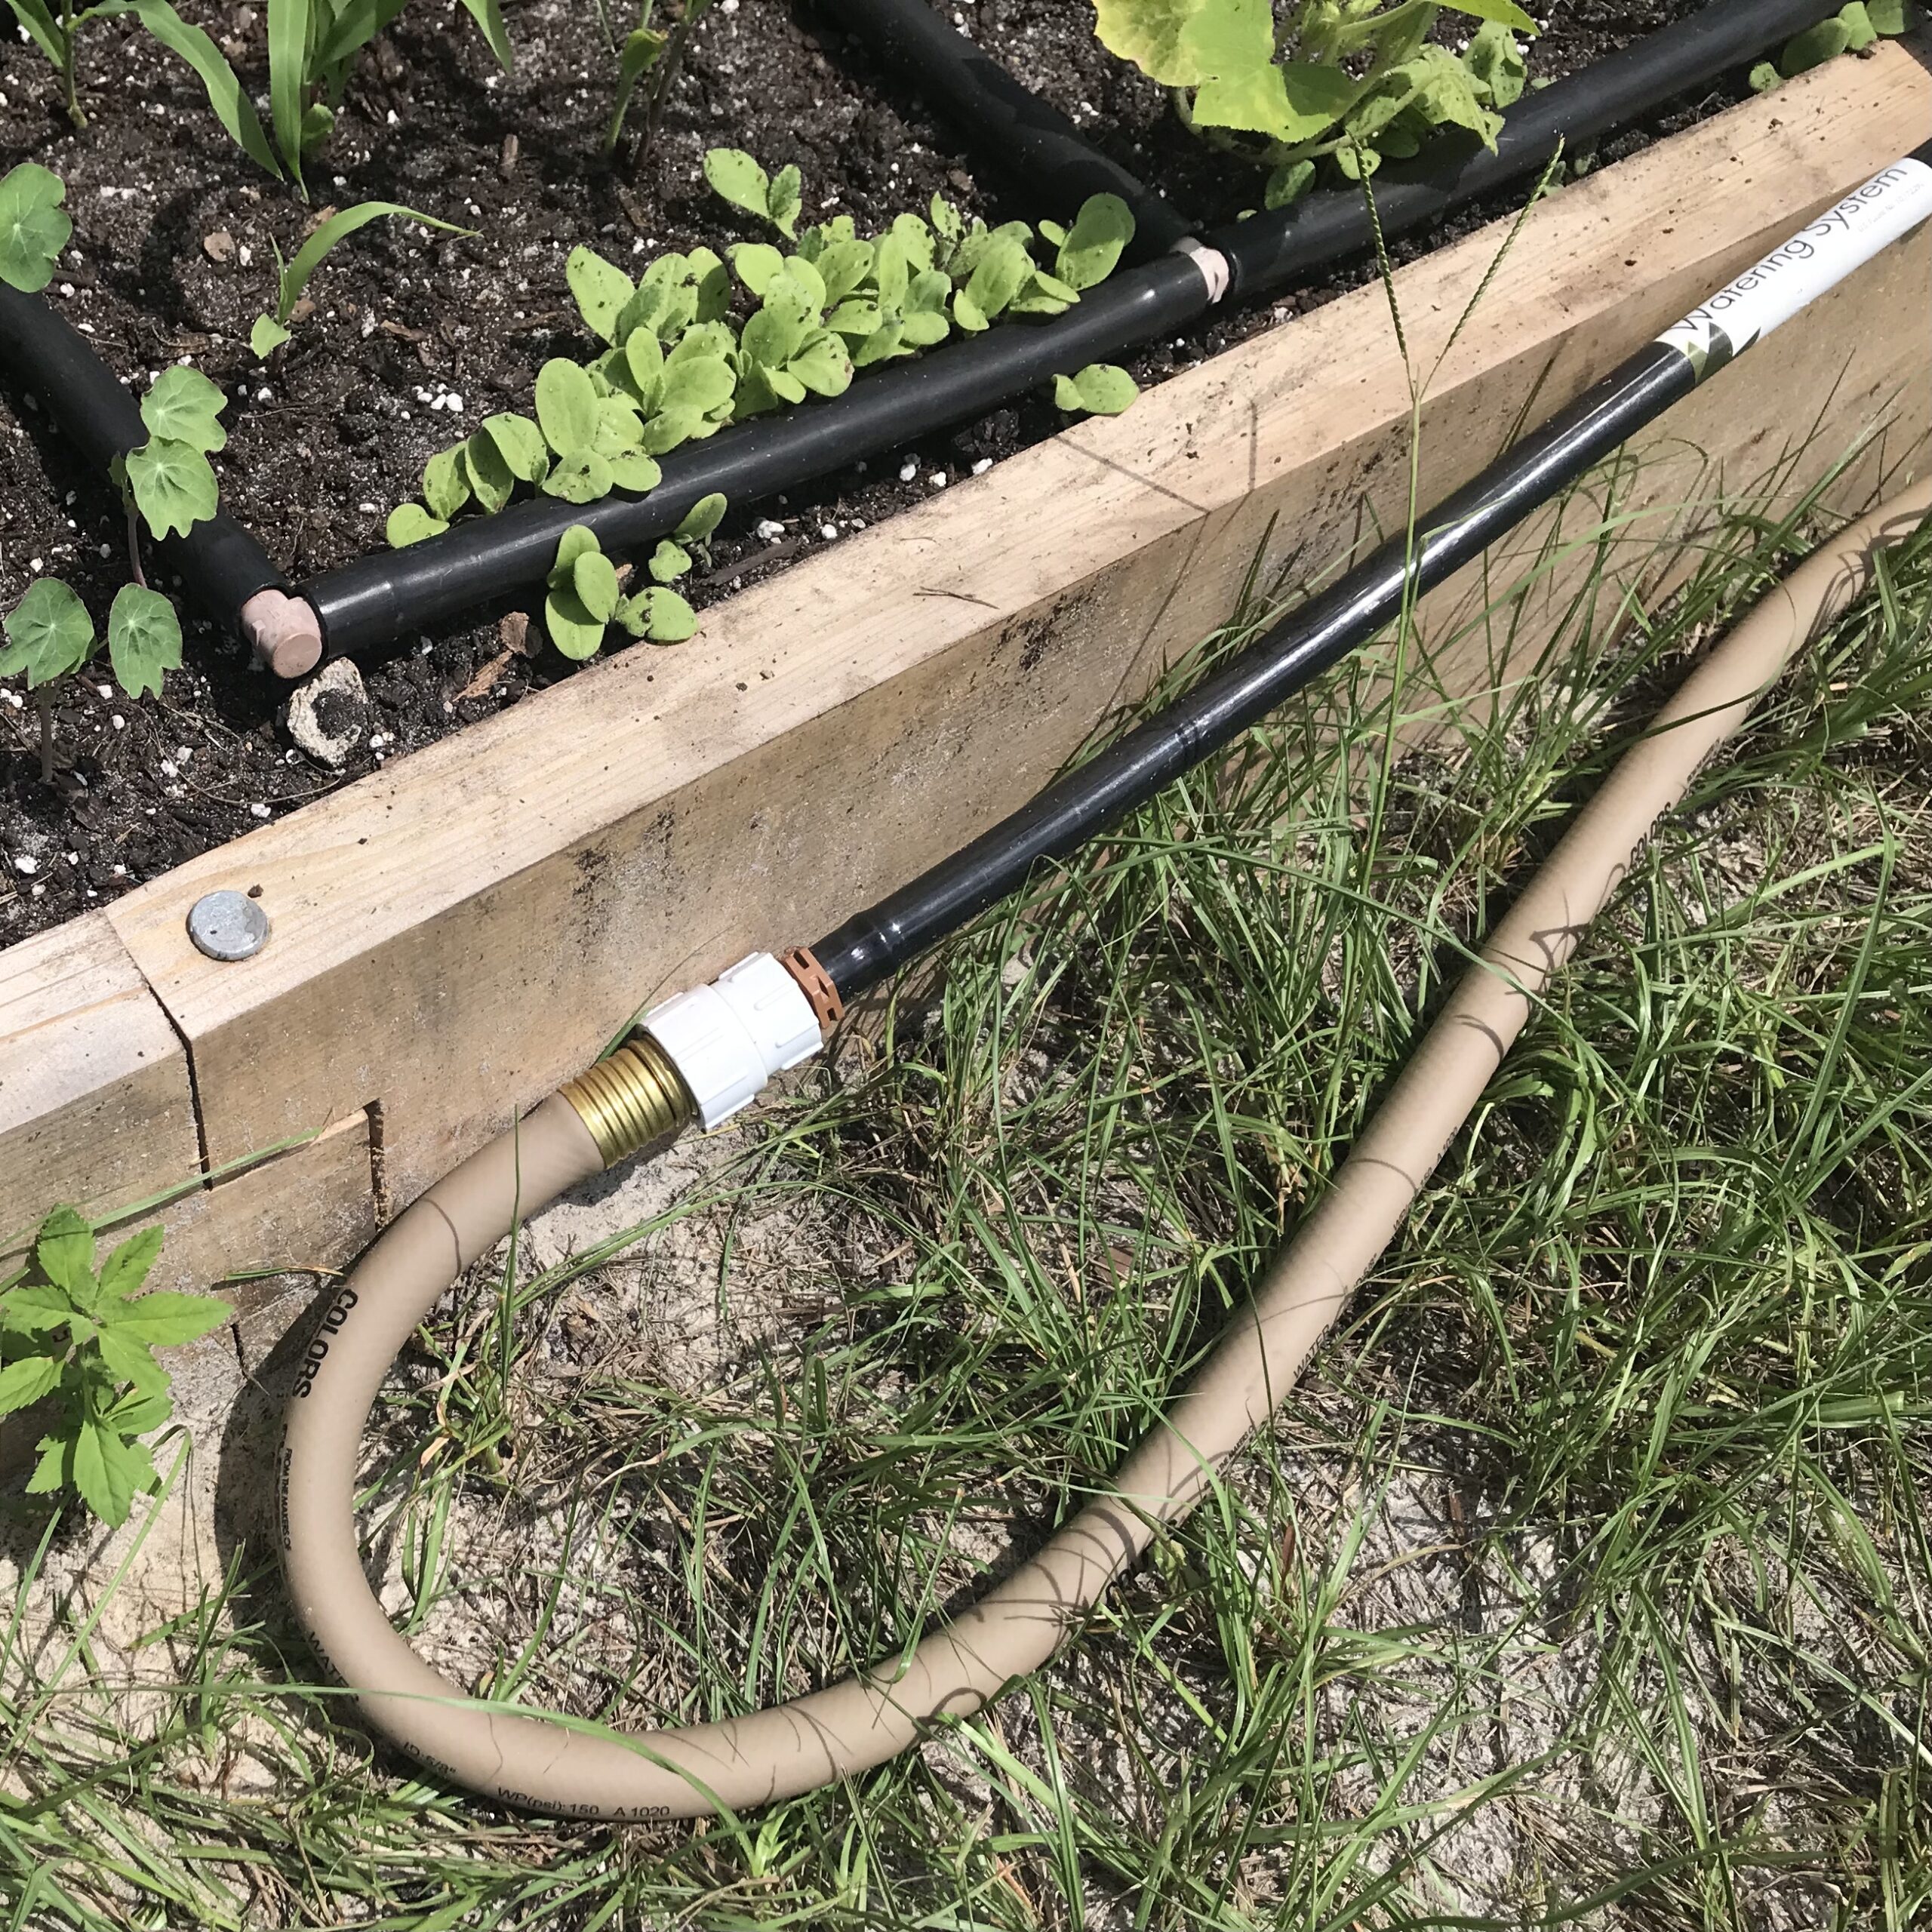 No More Tangle Garden Hoses - This Works Great! 